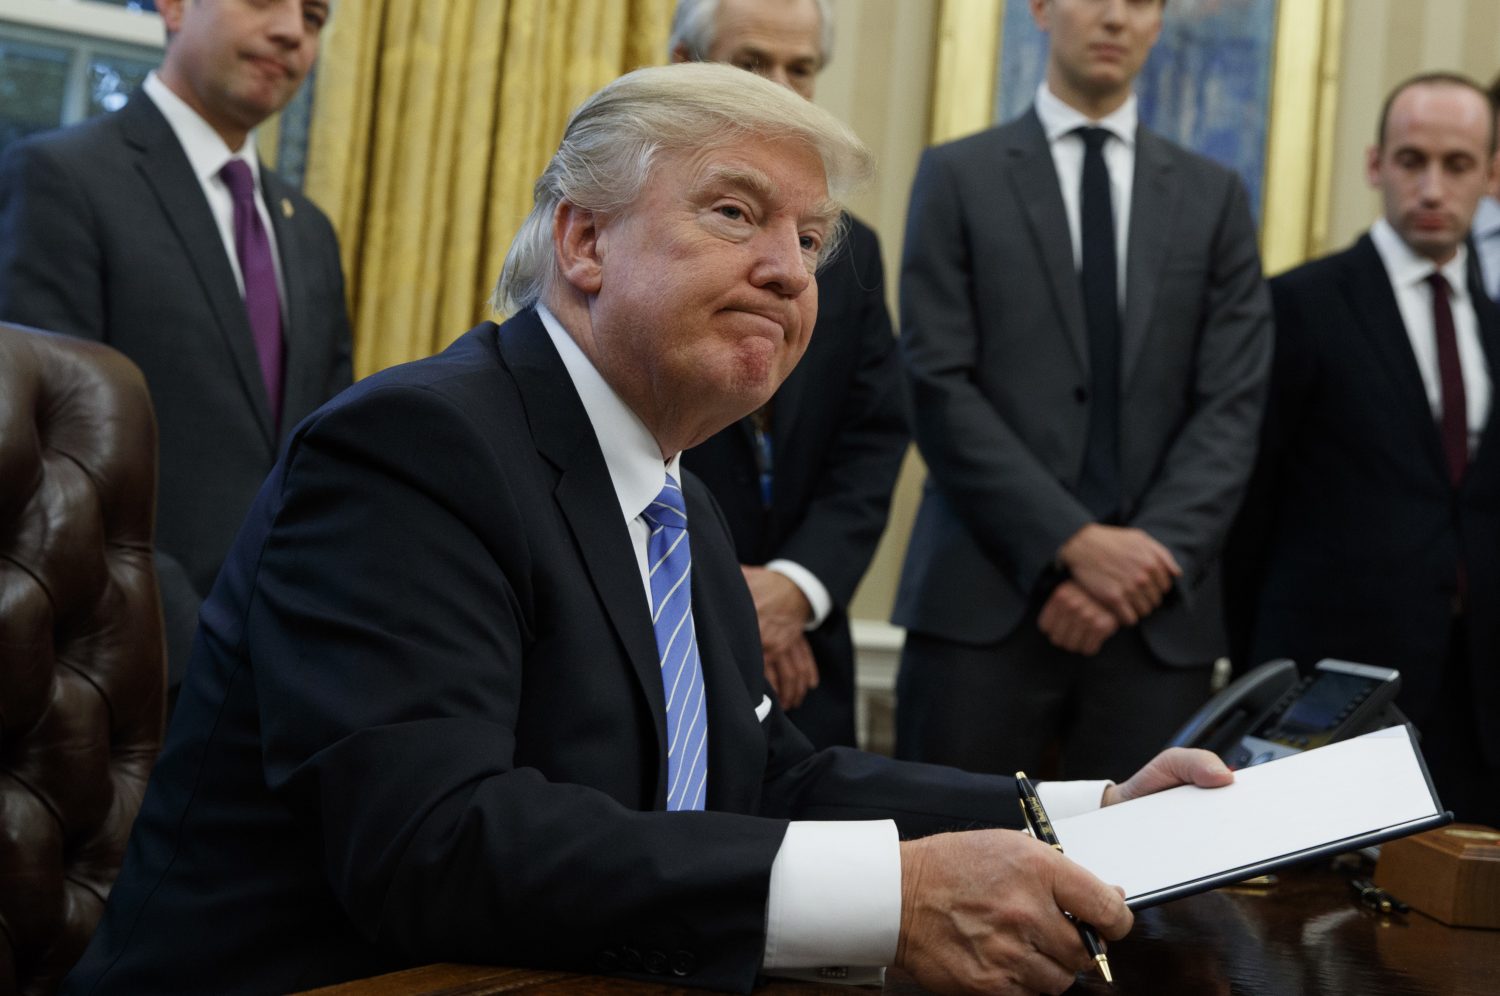 President Donald Trump looks up after signing the final of three executive orders, Monday, Jan. 23, 2017, in the Oval Office of the White House in Washington. (AP Photo/Evan Vucci)